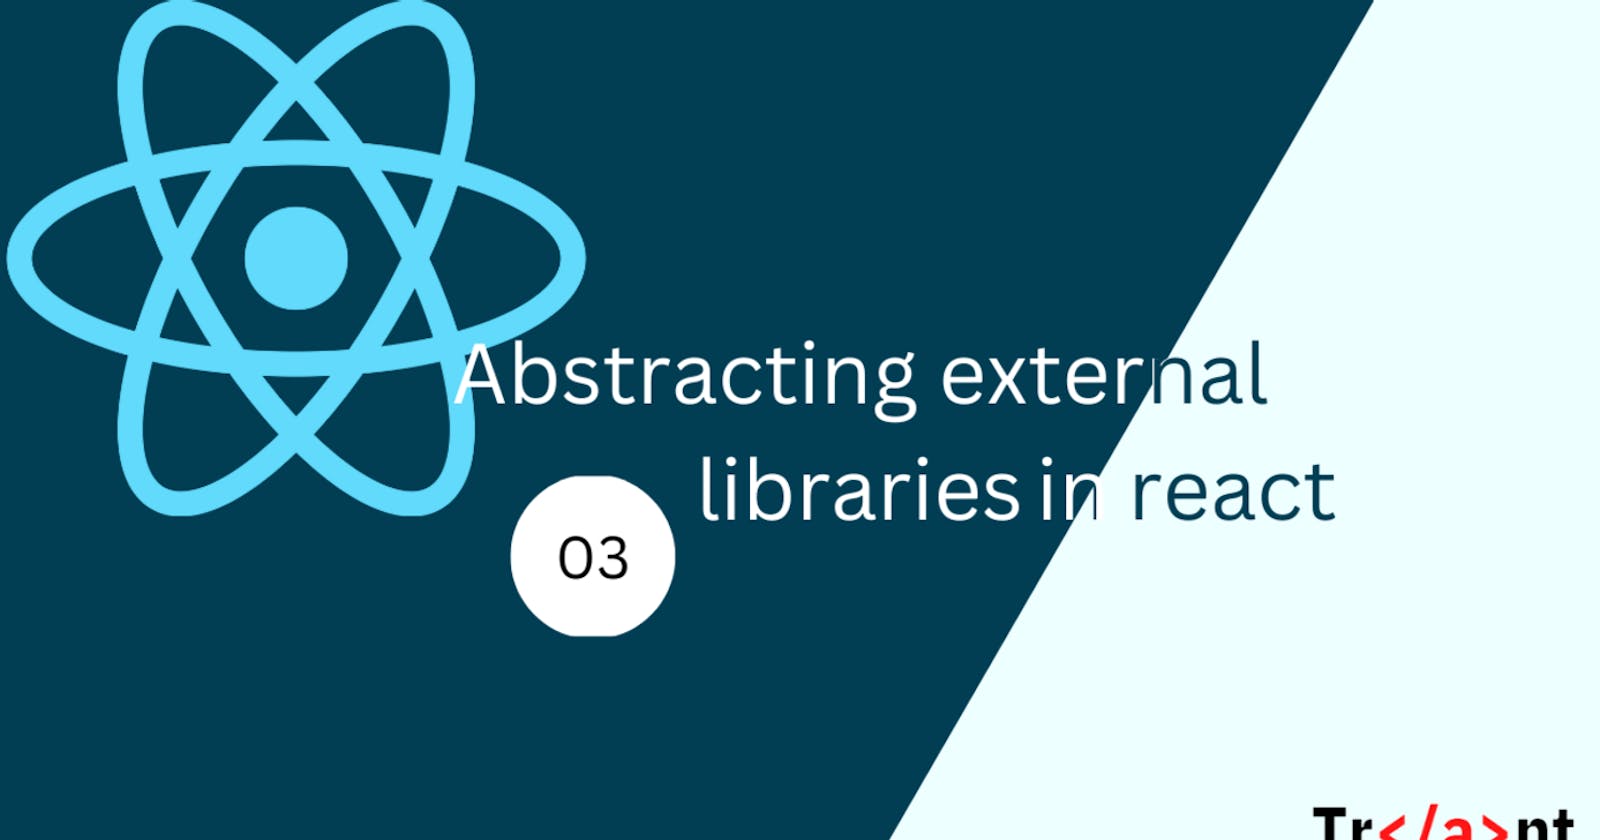 Abstracting external libraries in react